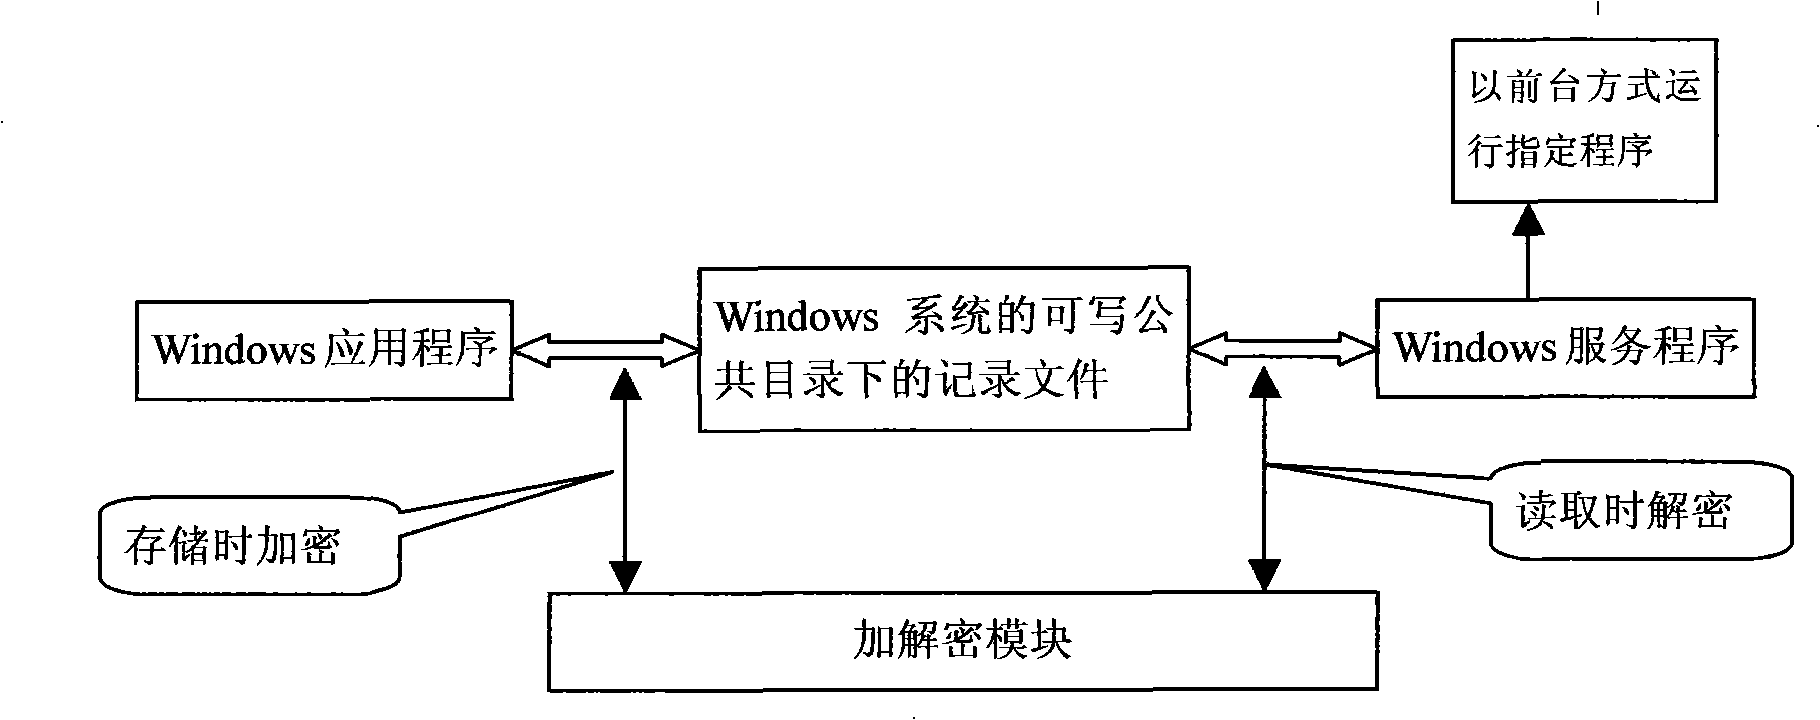 Method for raising user's authority for limitation account under Windows system